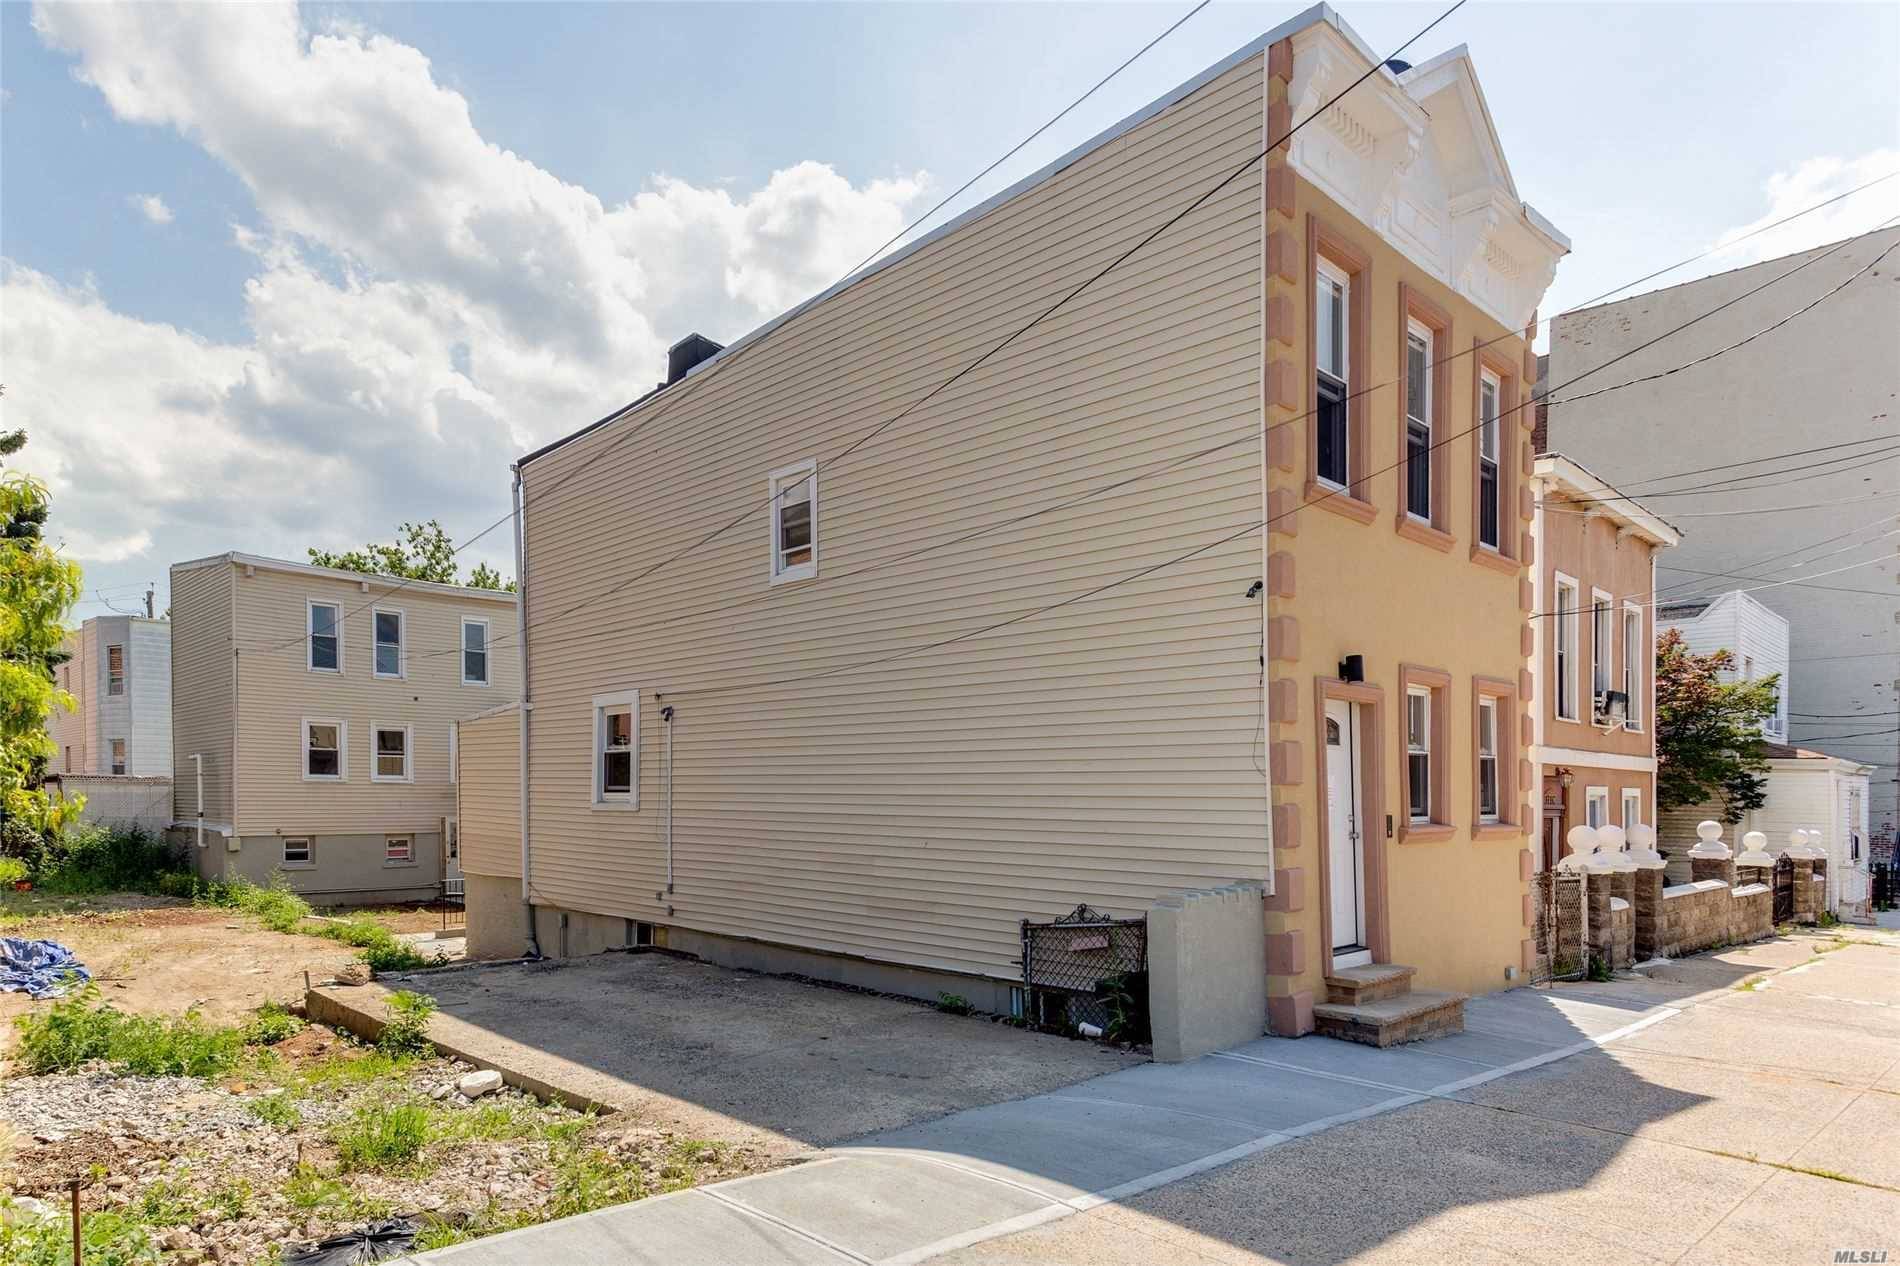 Fully Renovated legal 3 Family Investment Property In prime Pelham Bay location.